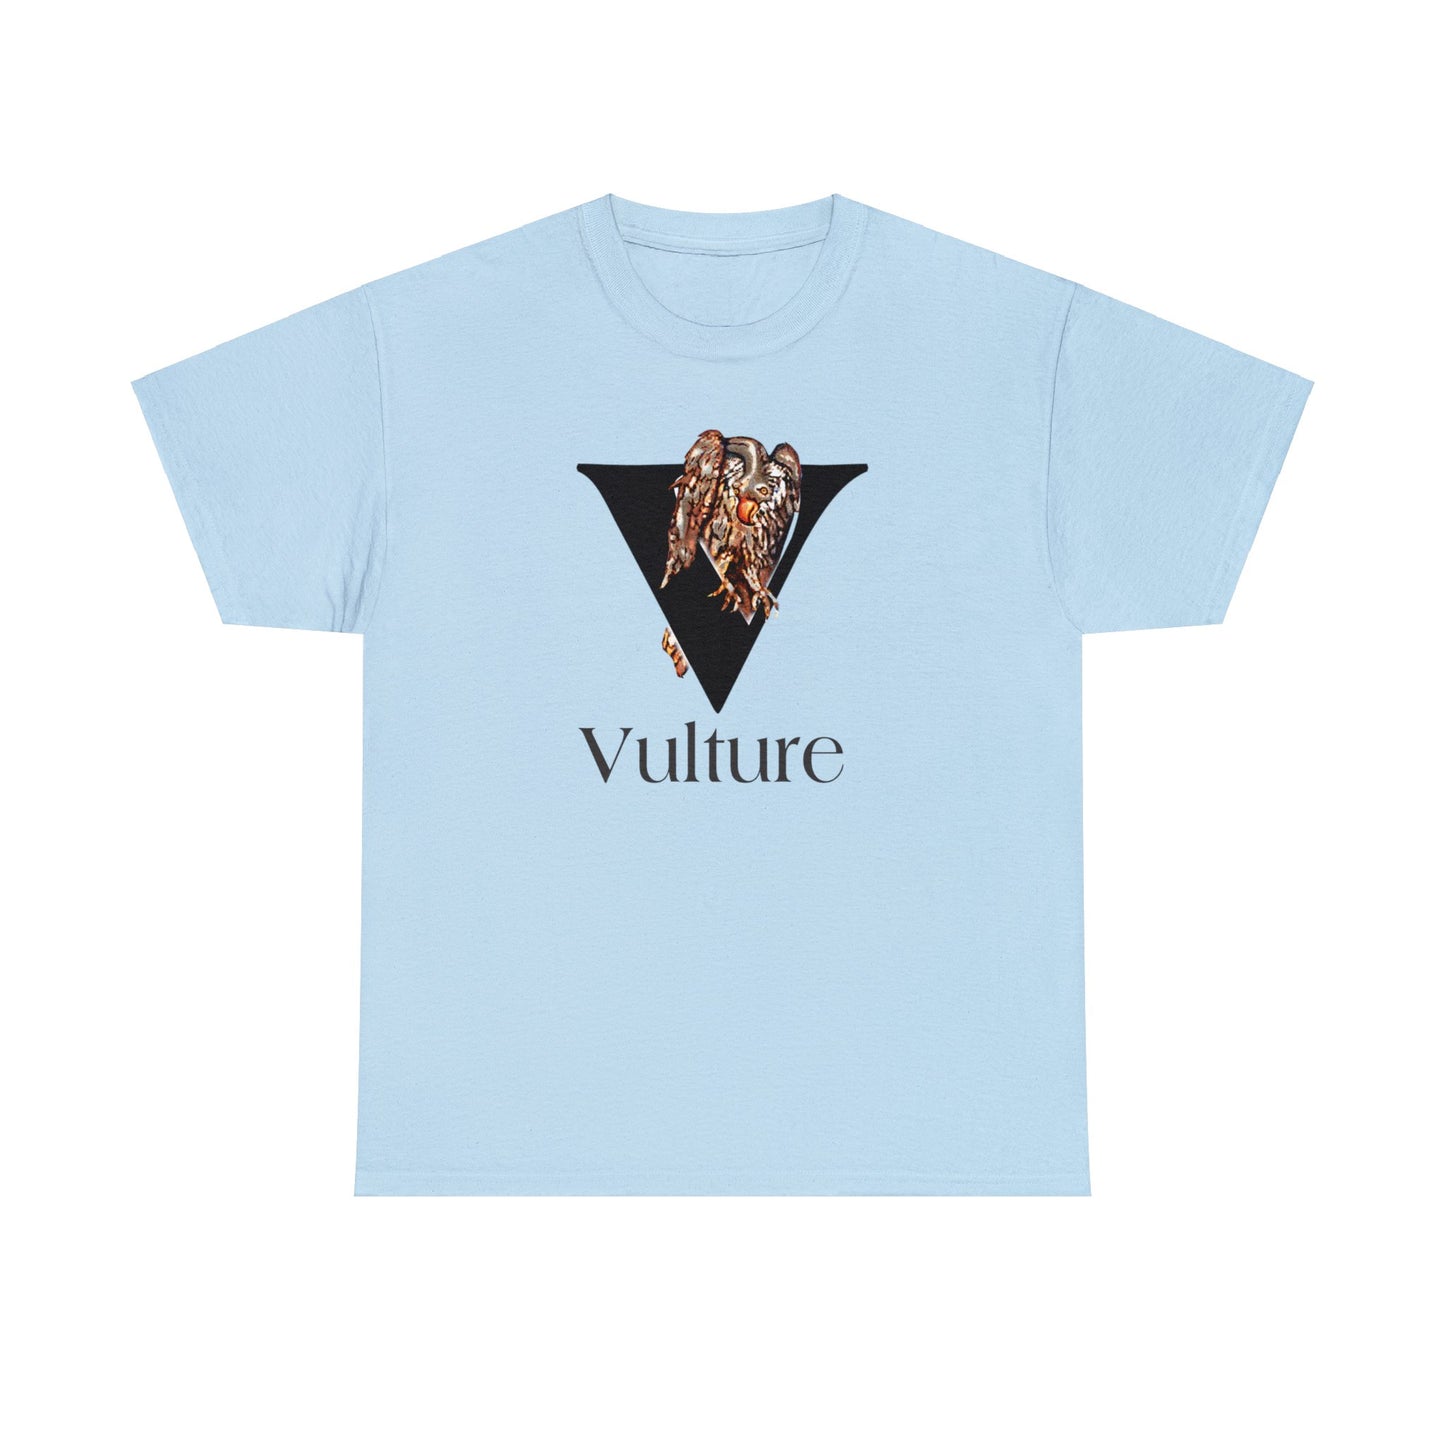 V is for Vulture, Vulture Drawing, Vulture T-Shirt, animal t-shirt, Vulture lovers shirt,